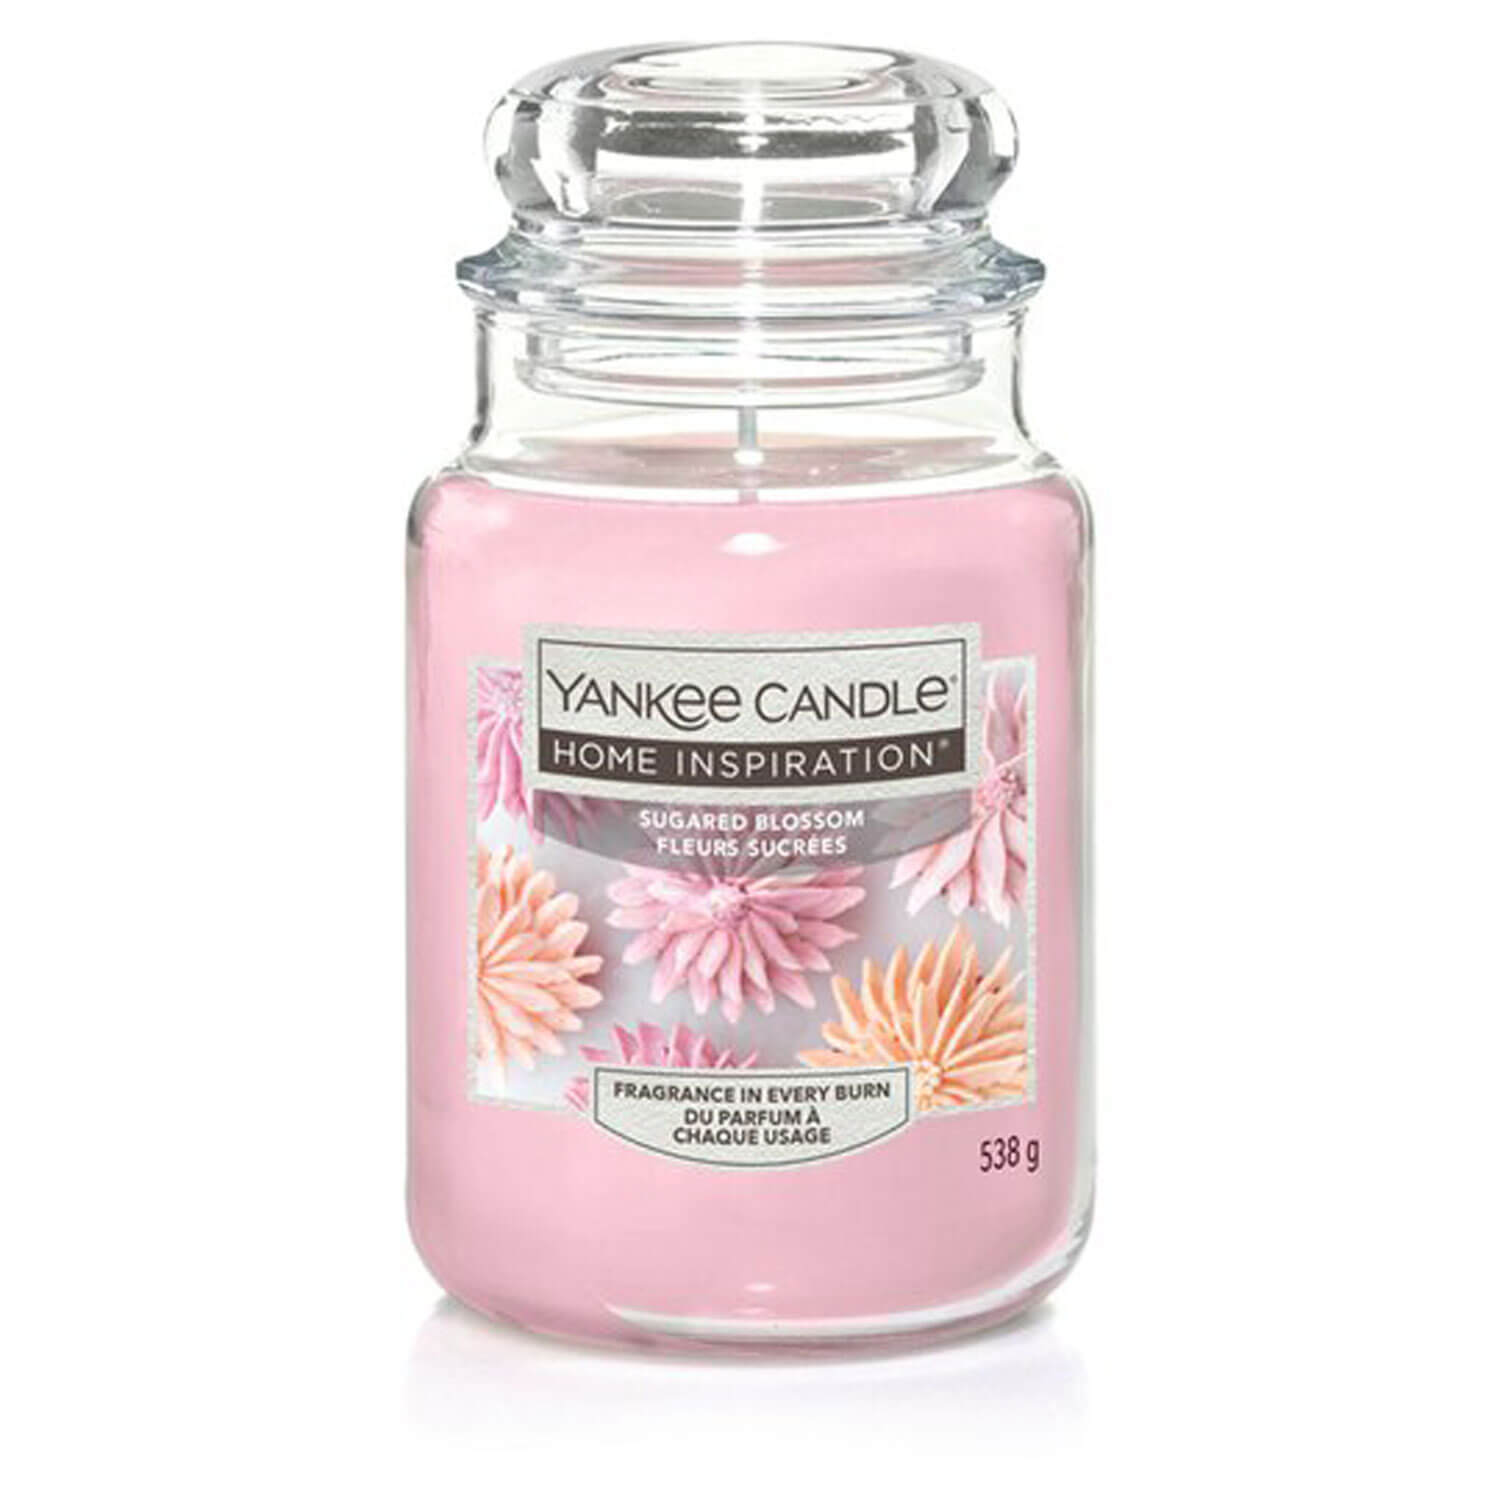 Yankee Candle Home Inspiration Large Candle - Sugared Blossom 1 Shaws Department Stores